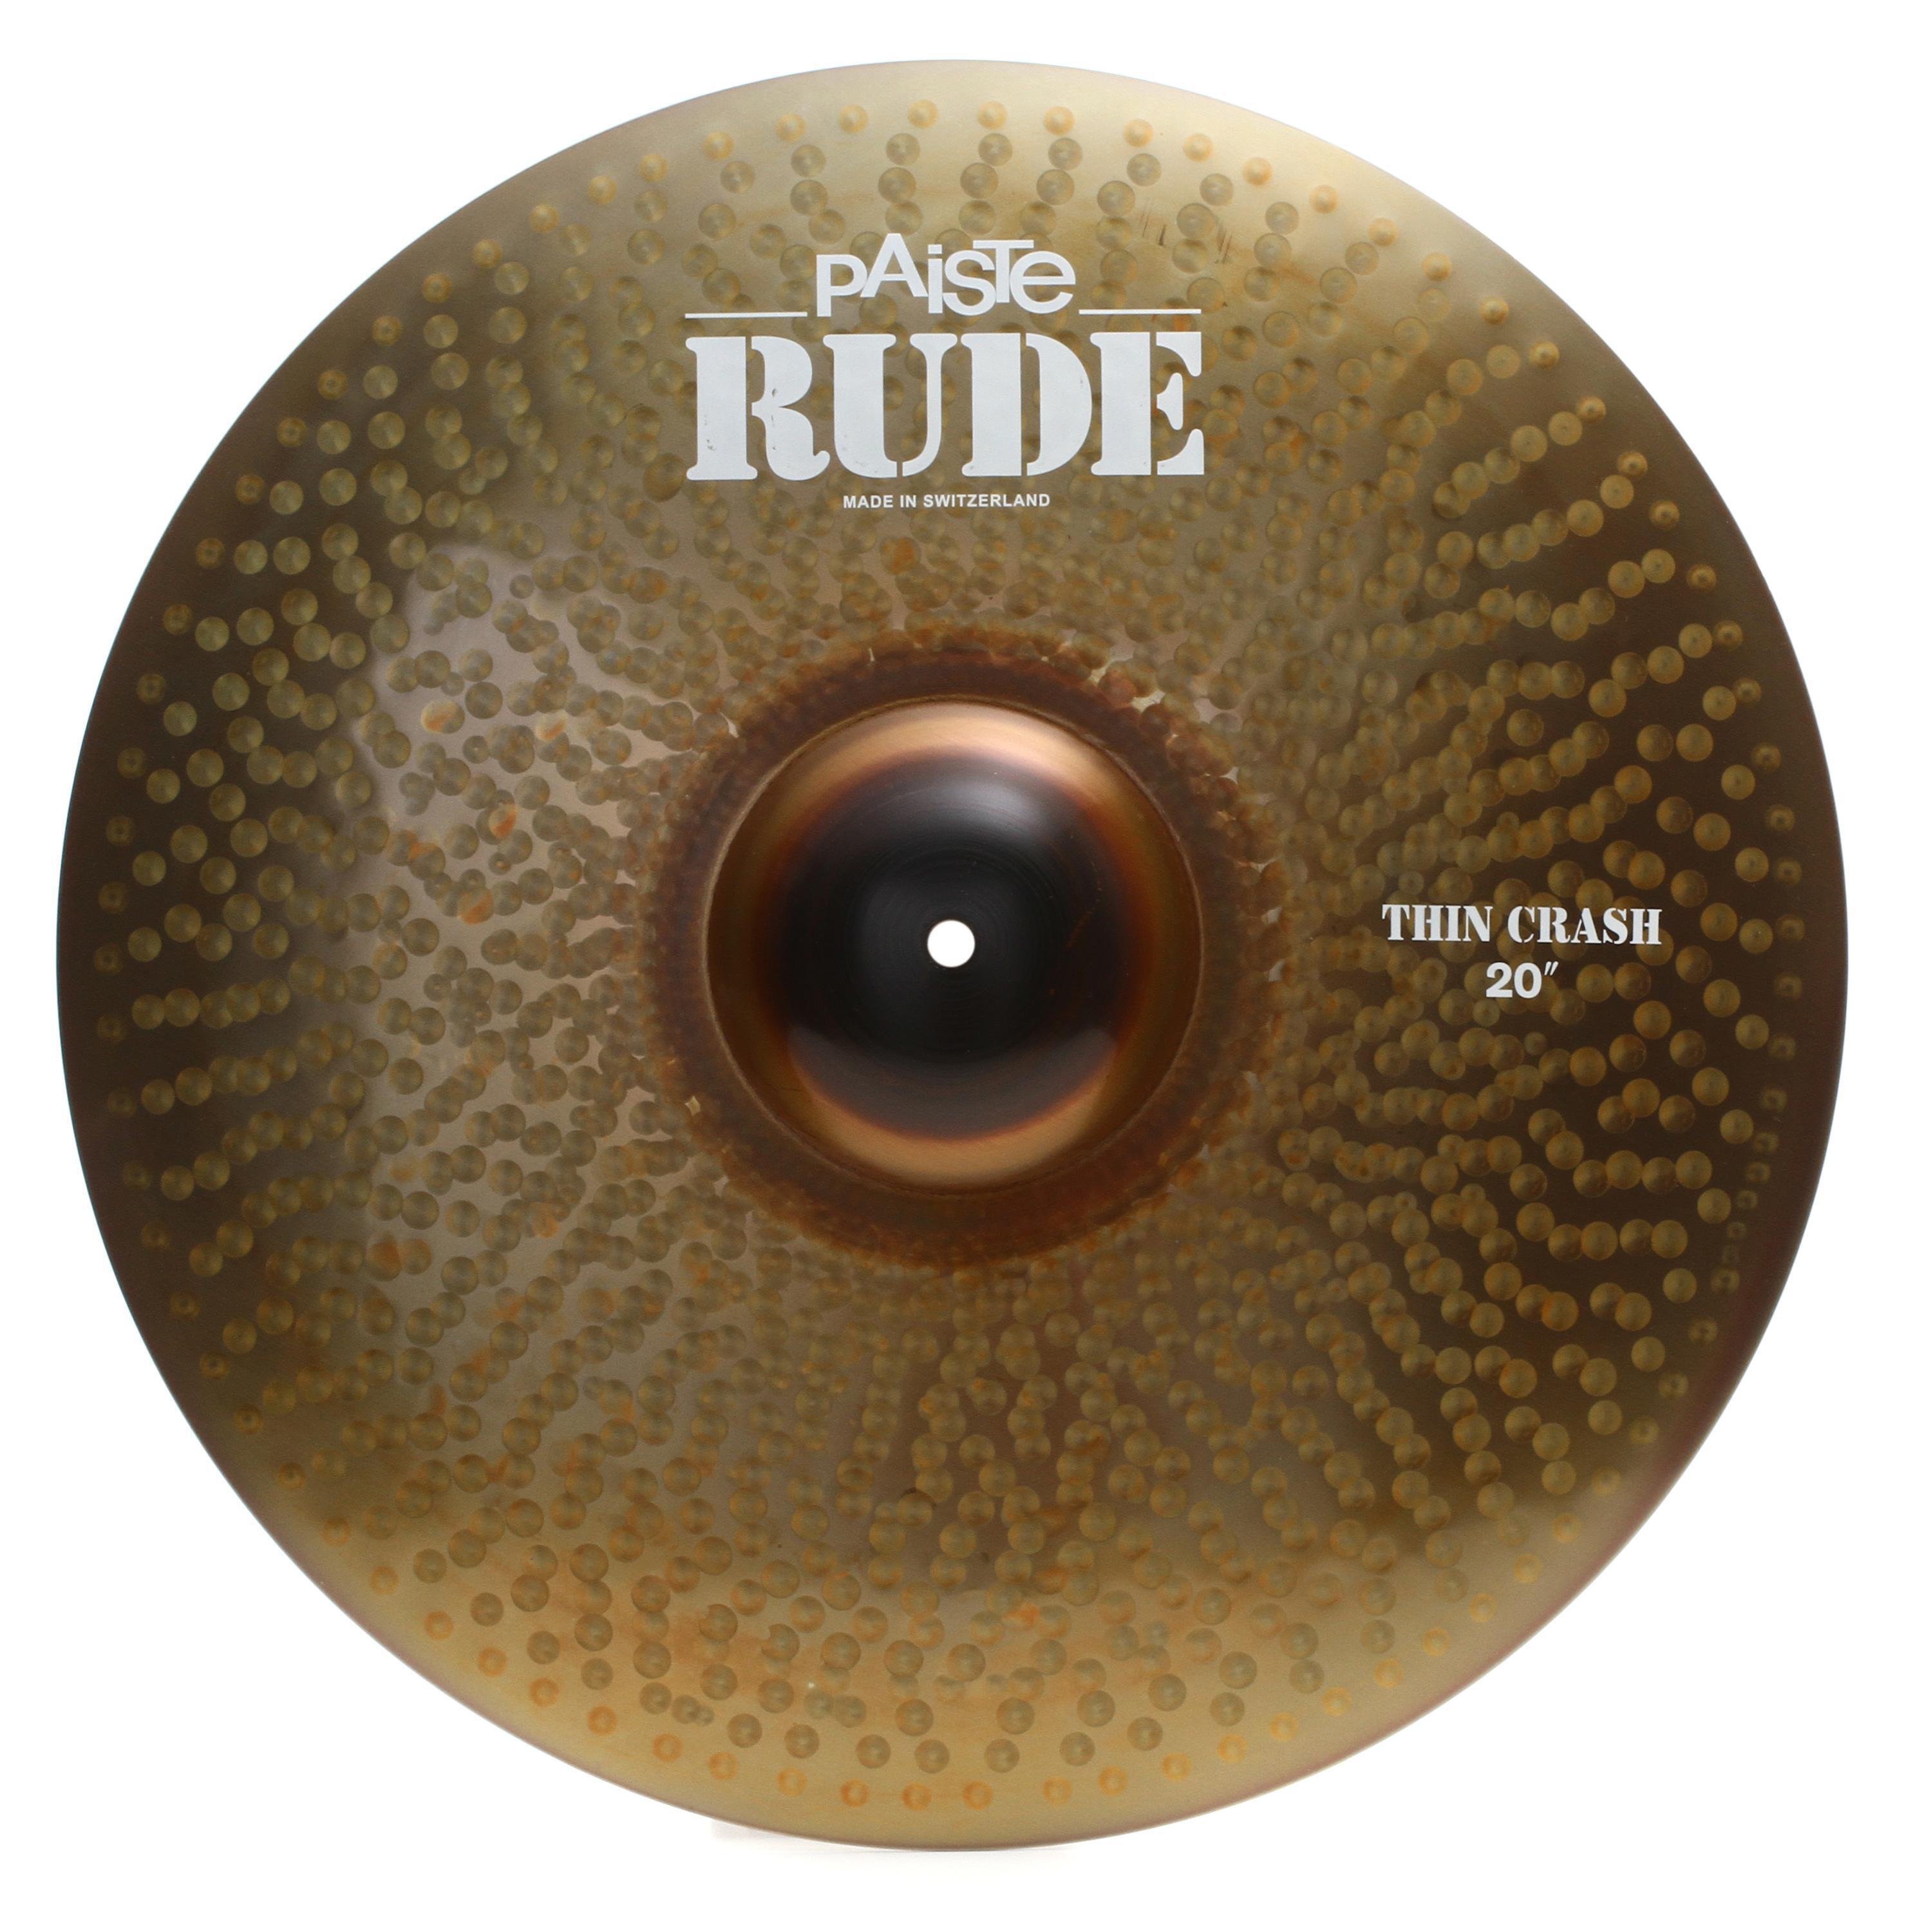 Paiste 20 inch RUDE Thin Crash Cymbal | Sweetwater